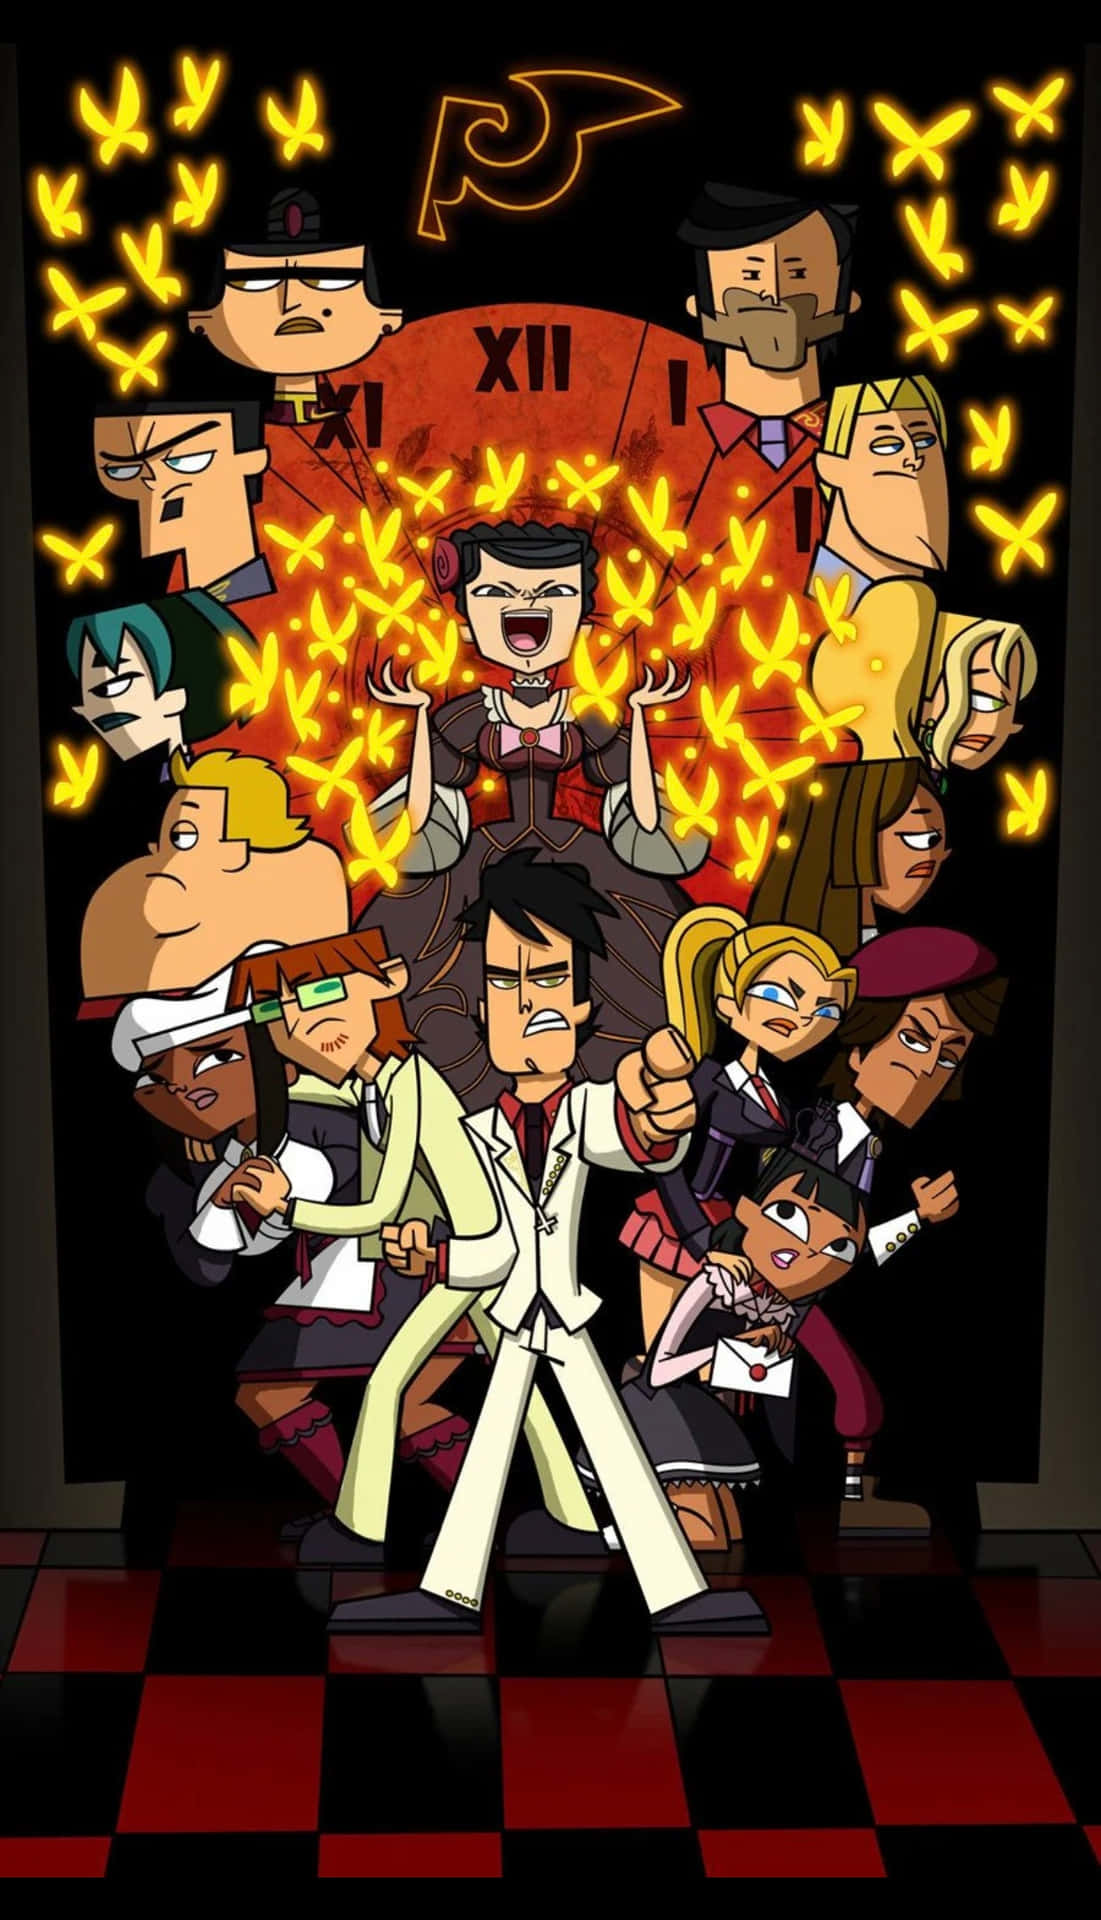 A Cartoon Poster With Many Characters In It